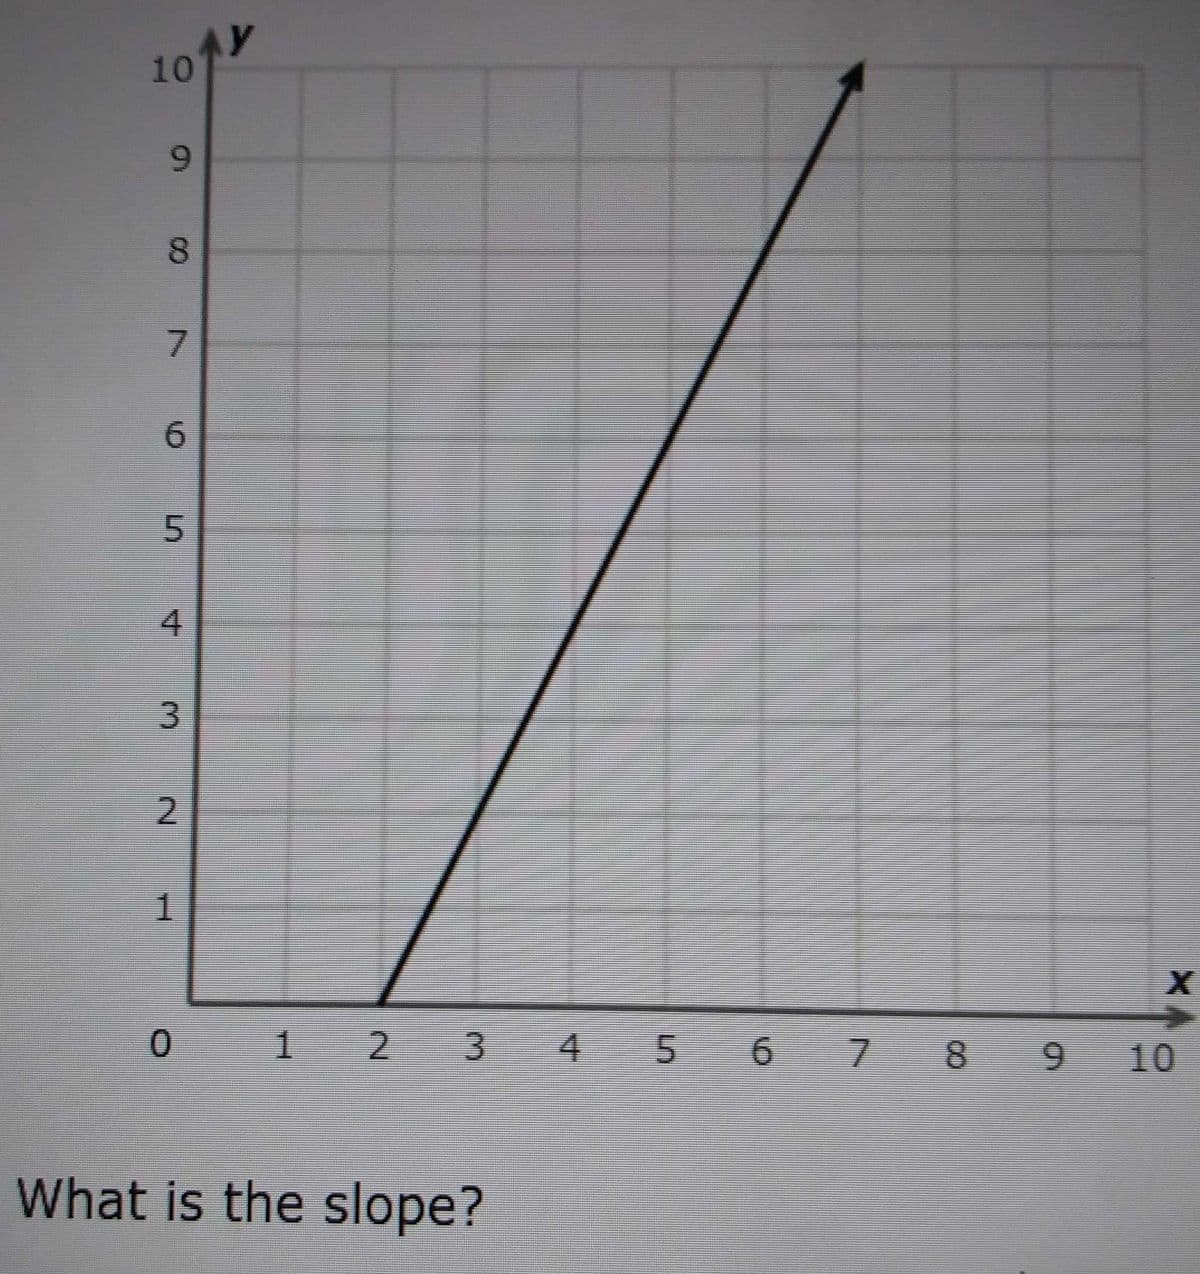 10
6.
3.
0 1 2 3
5 6 7 89
10
What is the slope?
4.
8.
5.
4)
2.
1.
